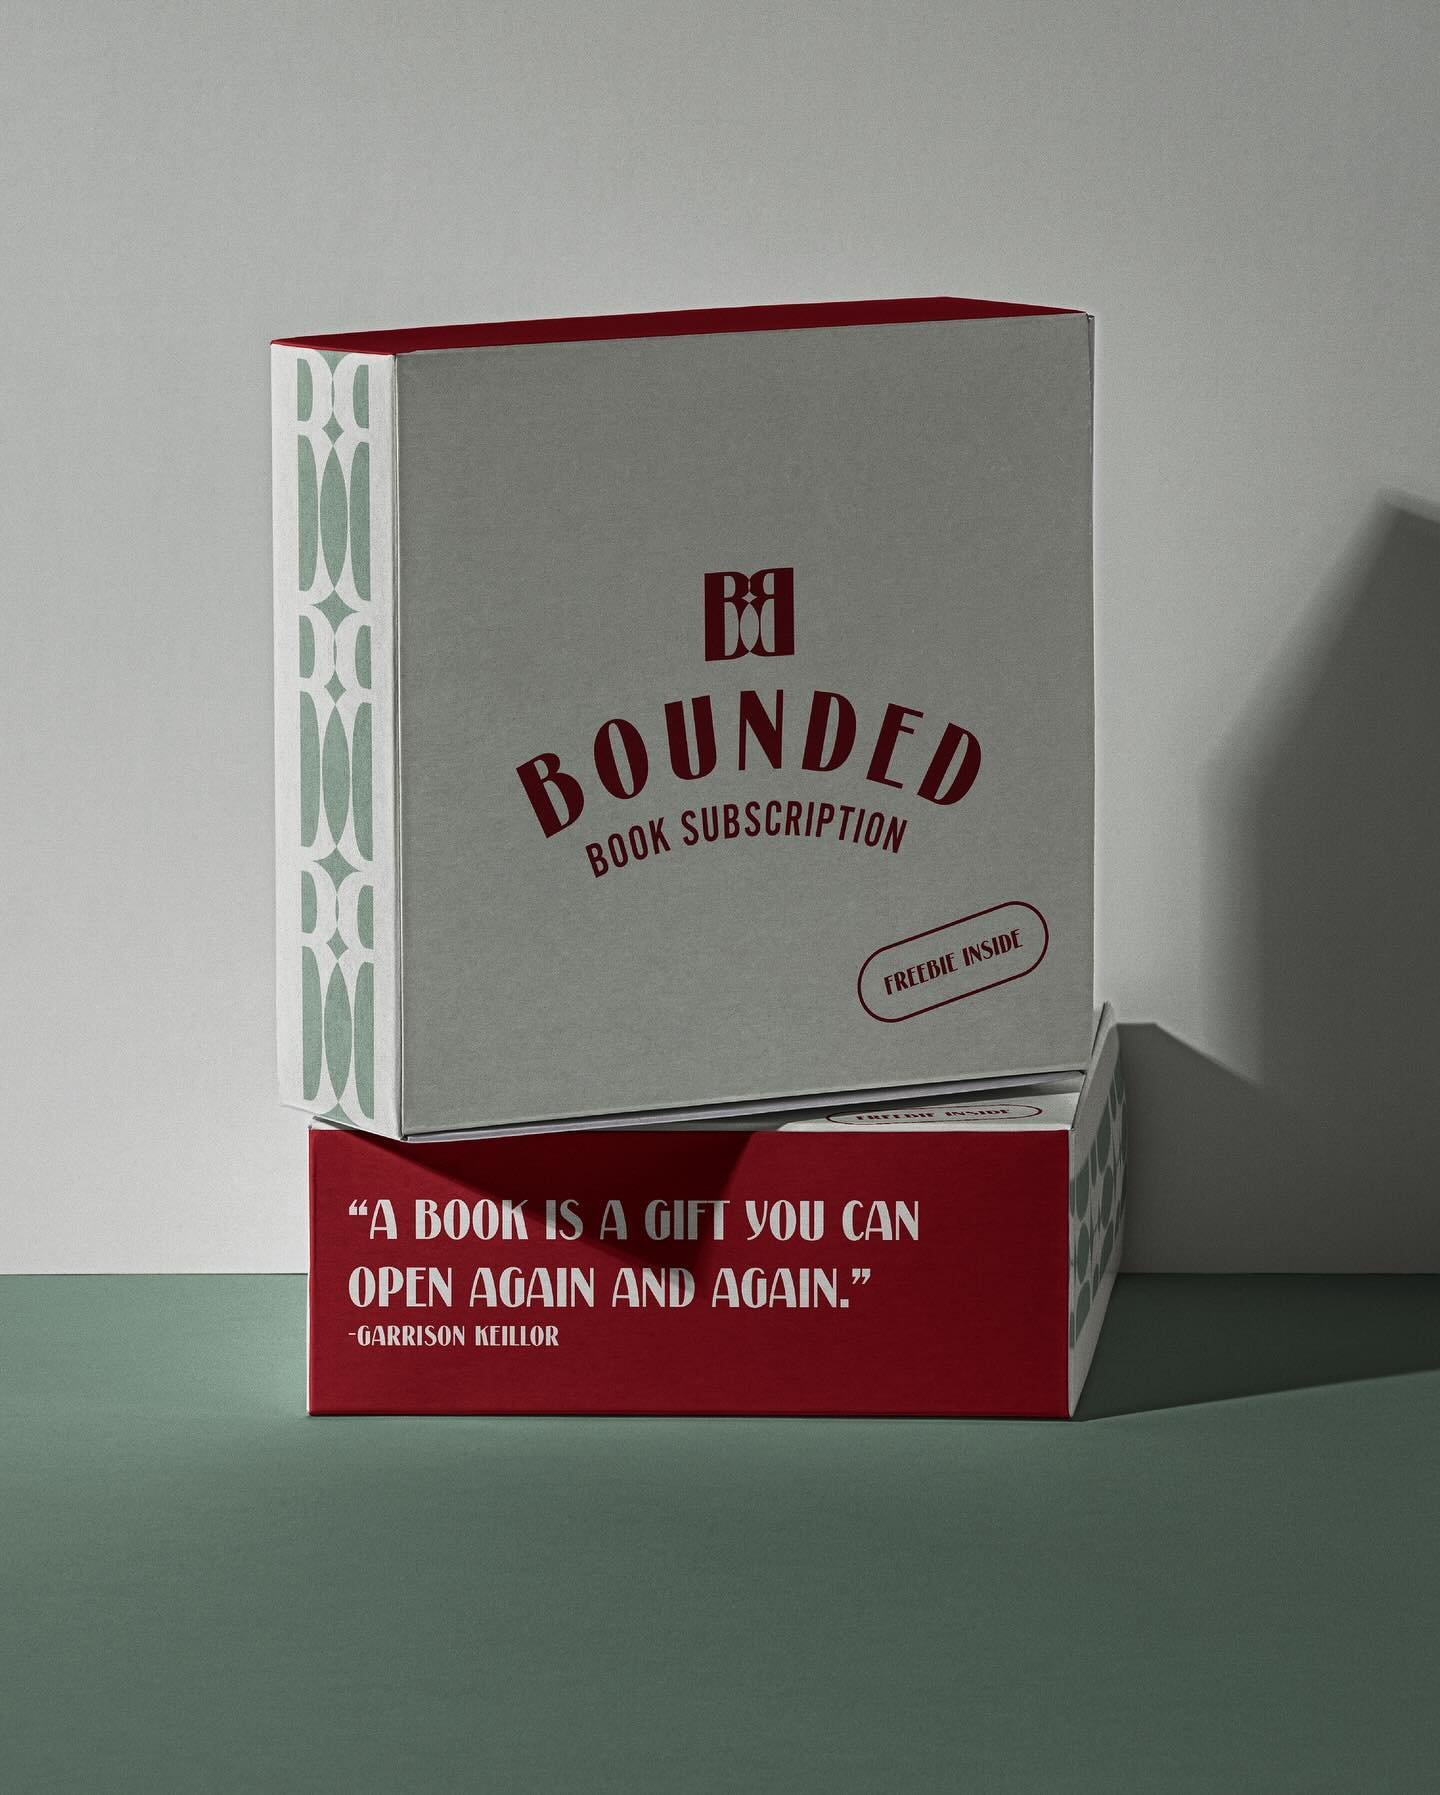 ✦ Packaging design, thank you cards and colour palette for Bounded, the book subscription. Each package will have a unique book-inspired quote✨

Brief is by&nbsp;@themondayagency&nbsp;&amp;&nbsp;@thebriefassociation #tbabounded&nbsp;#thebriefassociat